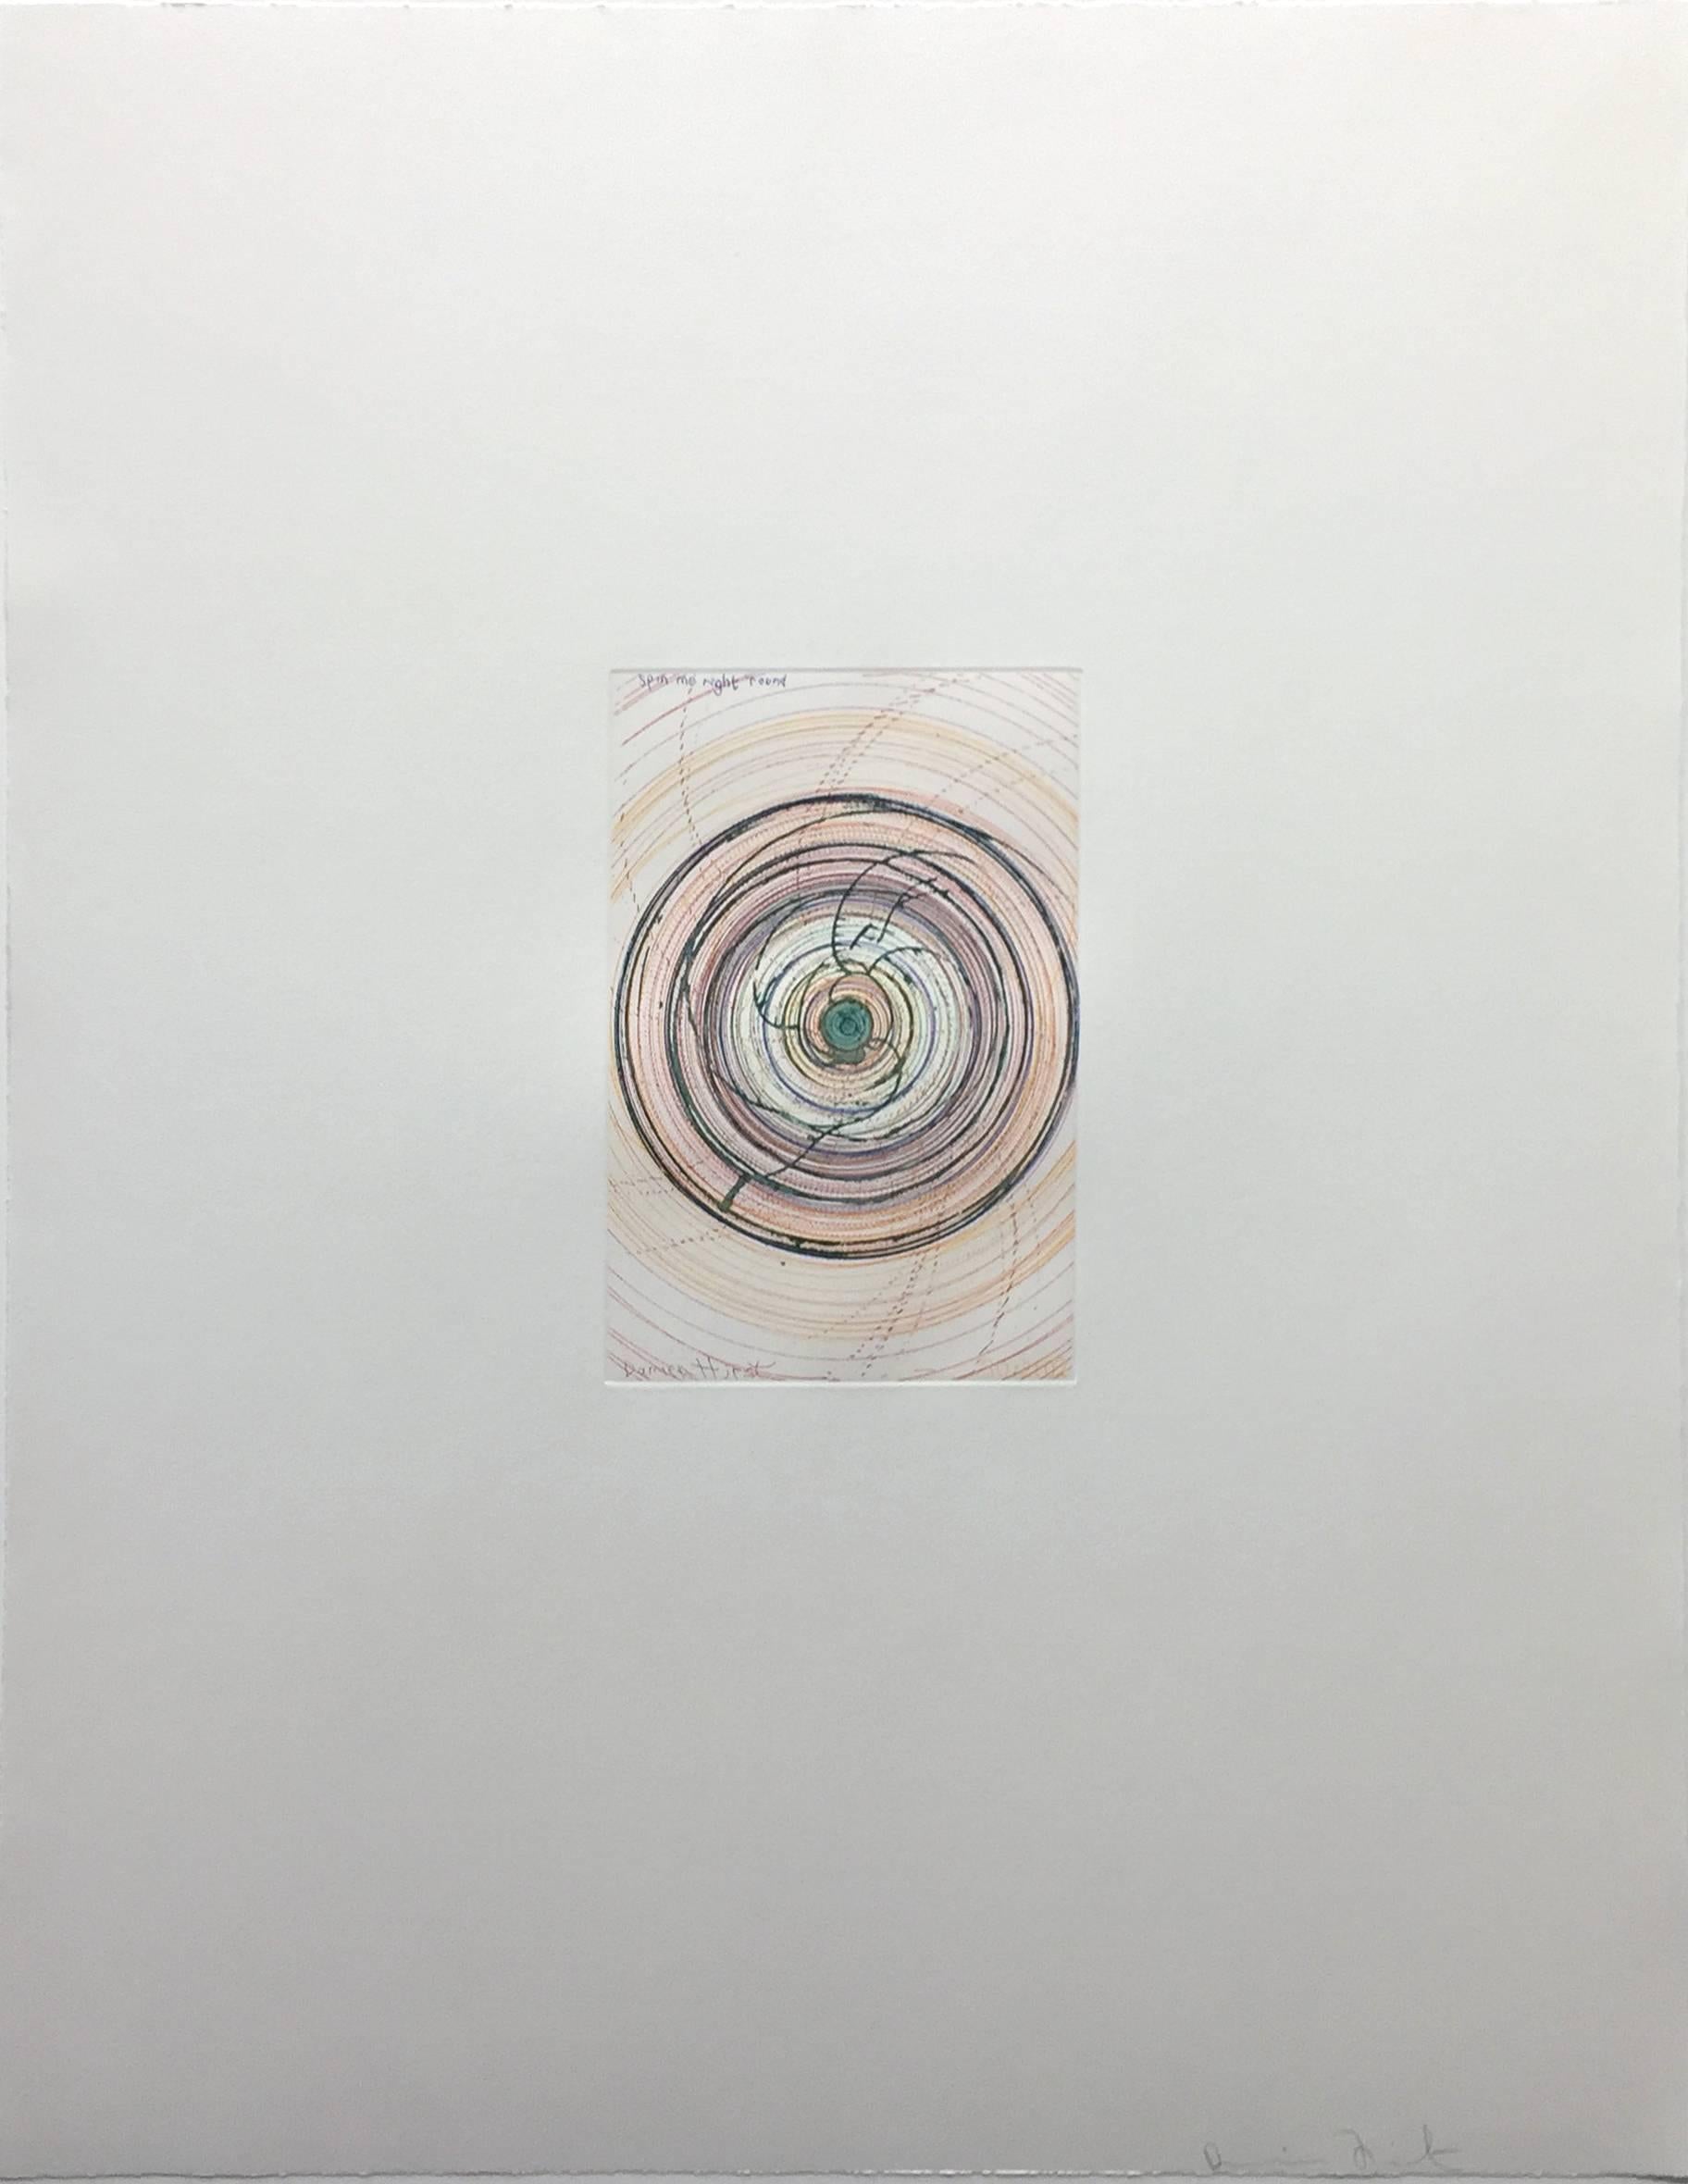 Spin me right round  - Print by Damien Hirst